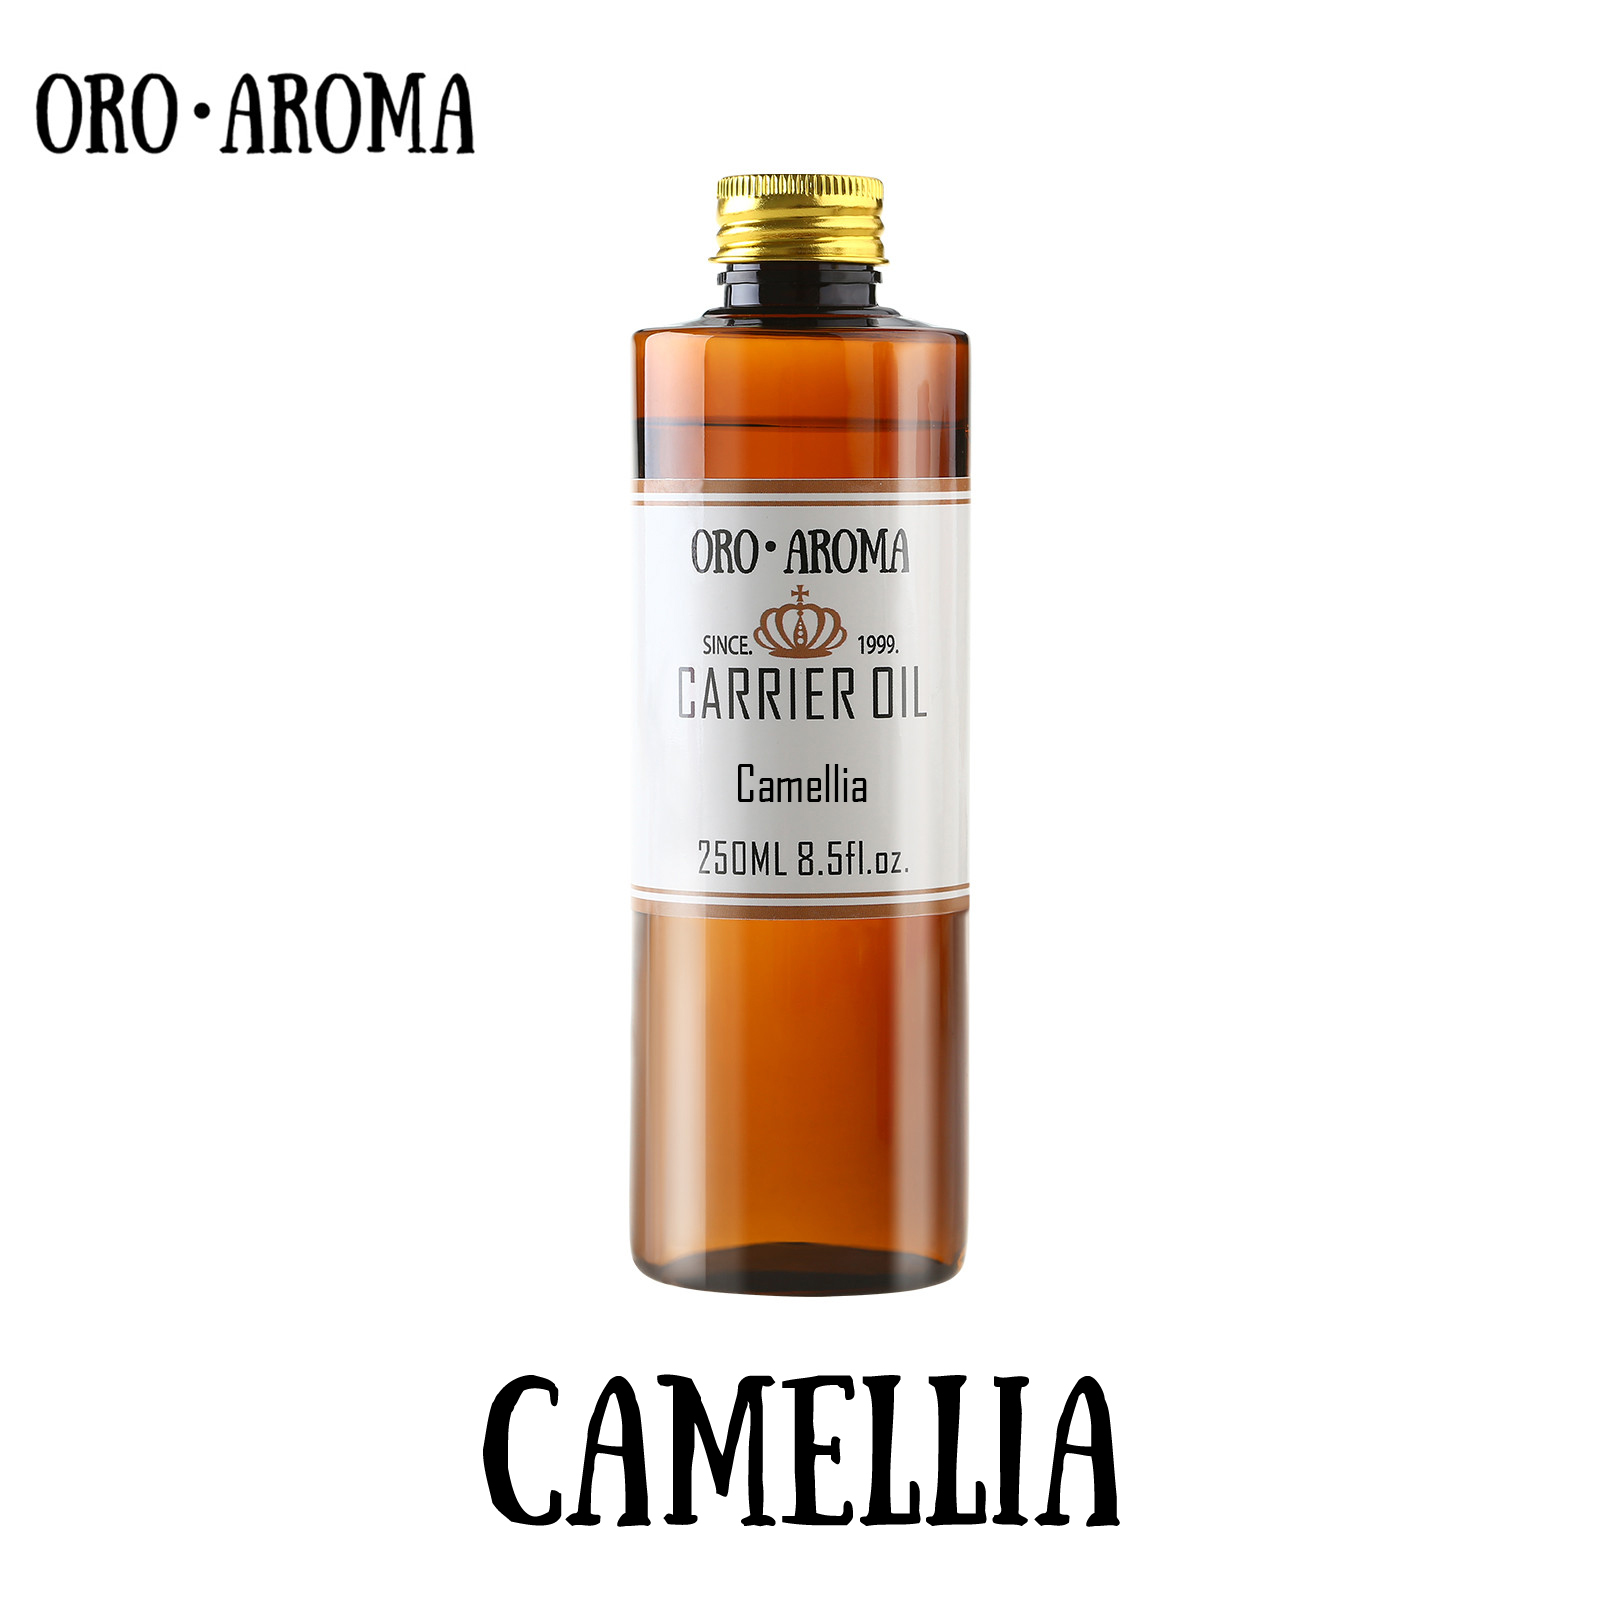 Famous brand oroaroma camellia seeds oil natural aromatherapy high-capacity skin body care massage camellia seeds essential oil